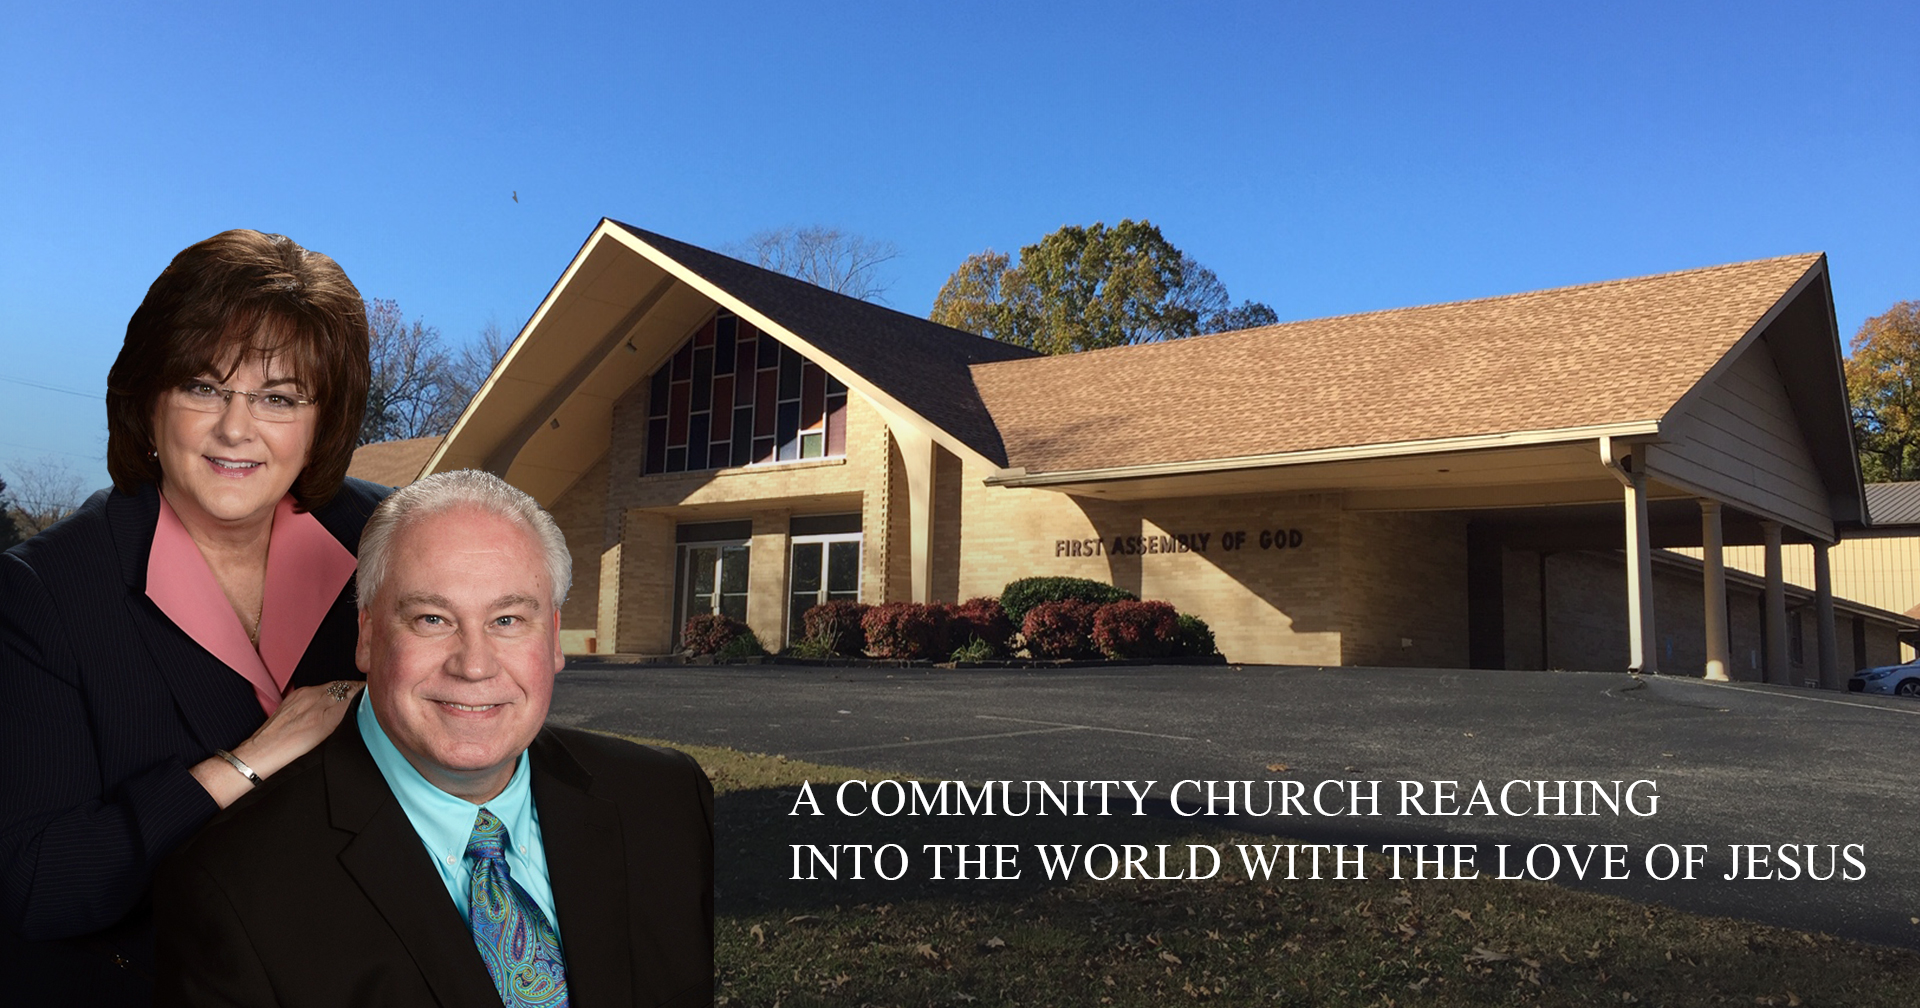 A Community Church Reaching into The World With the Love of Jesus